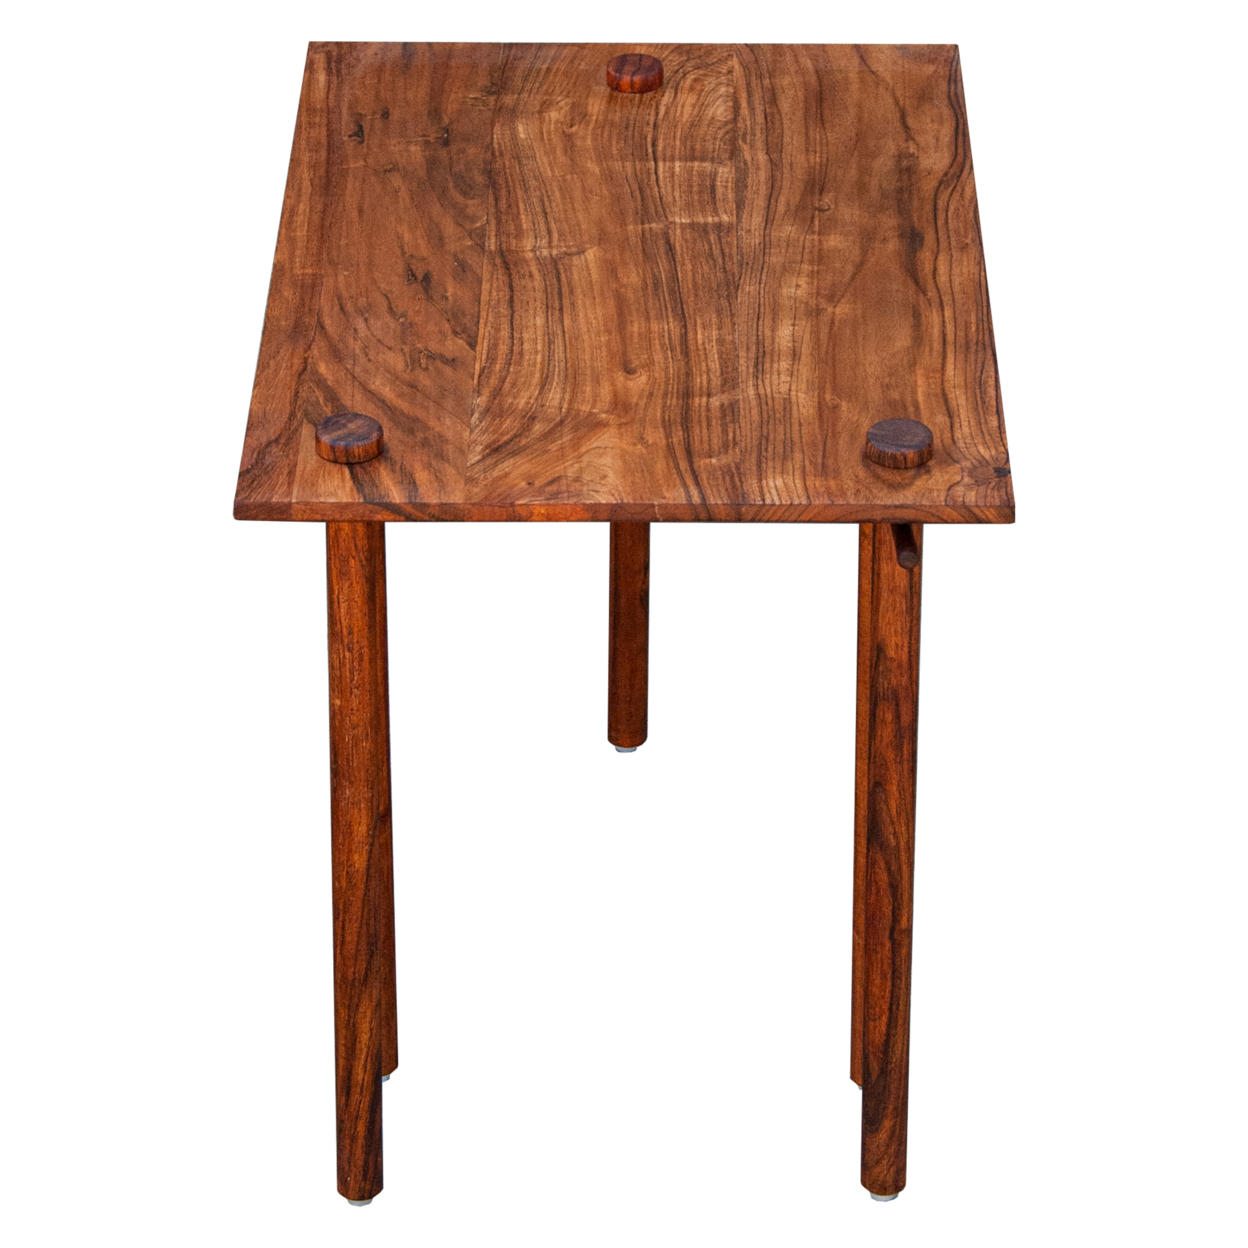 18 Inch Rectangular End Table With Pull Out Extension And Grain Details, Brown, Saltoro Sherpi